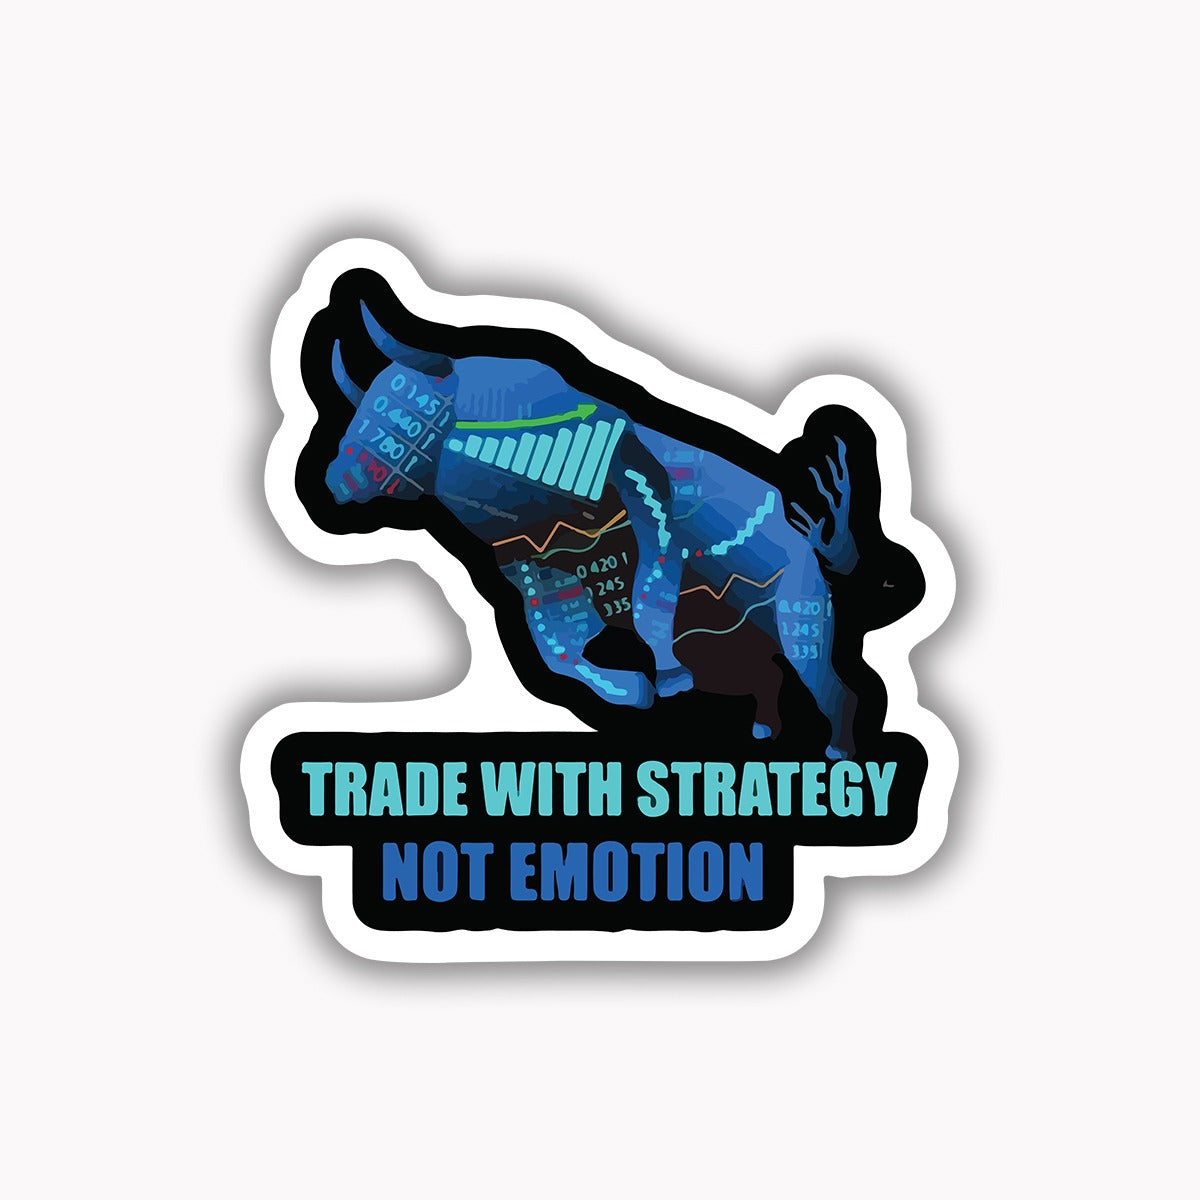 Trade with strategy